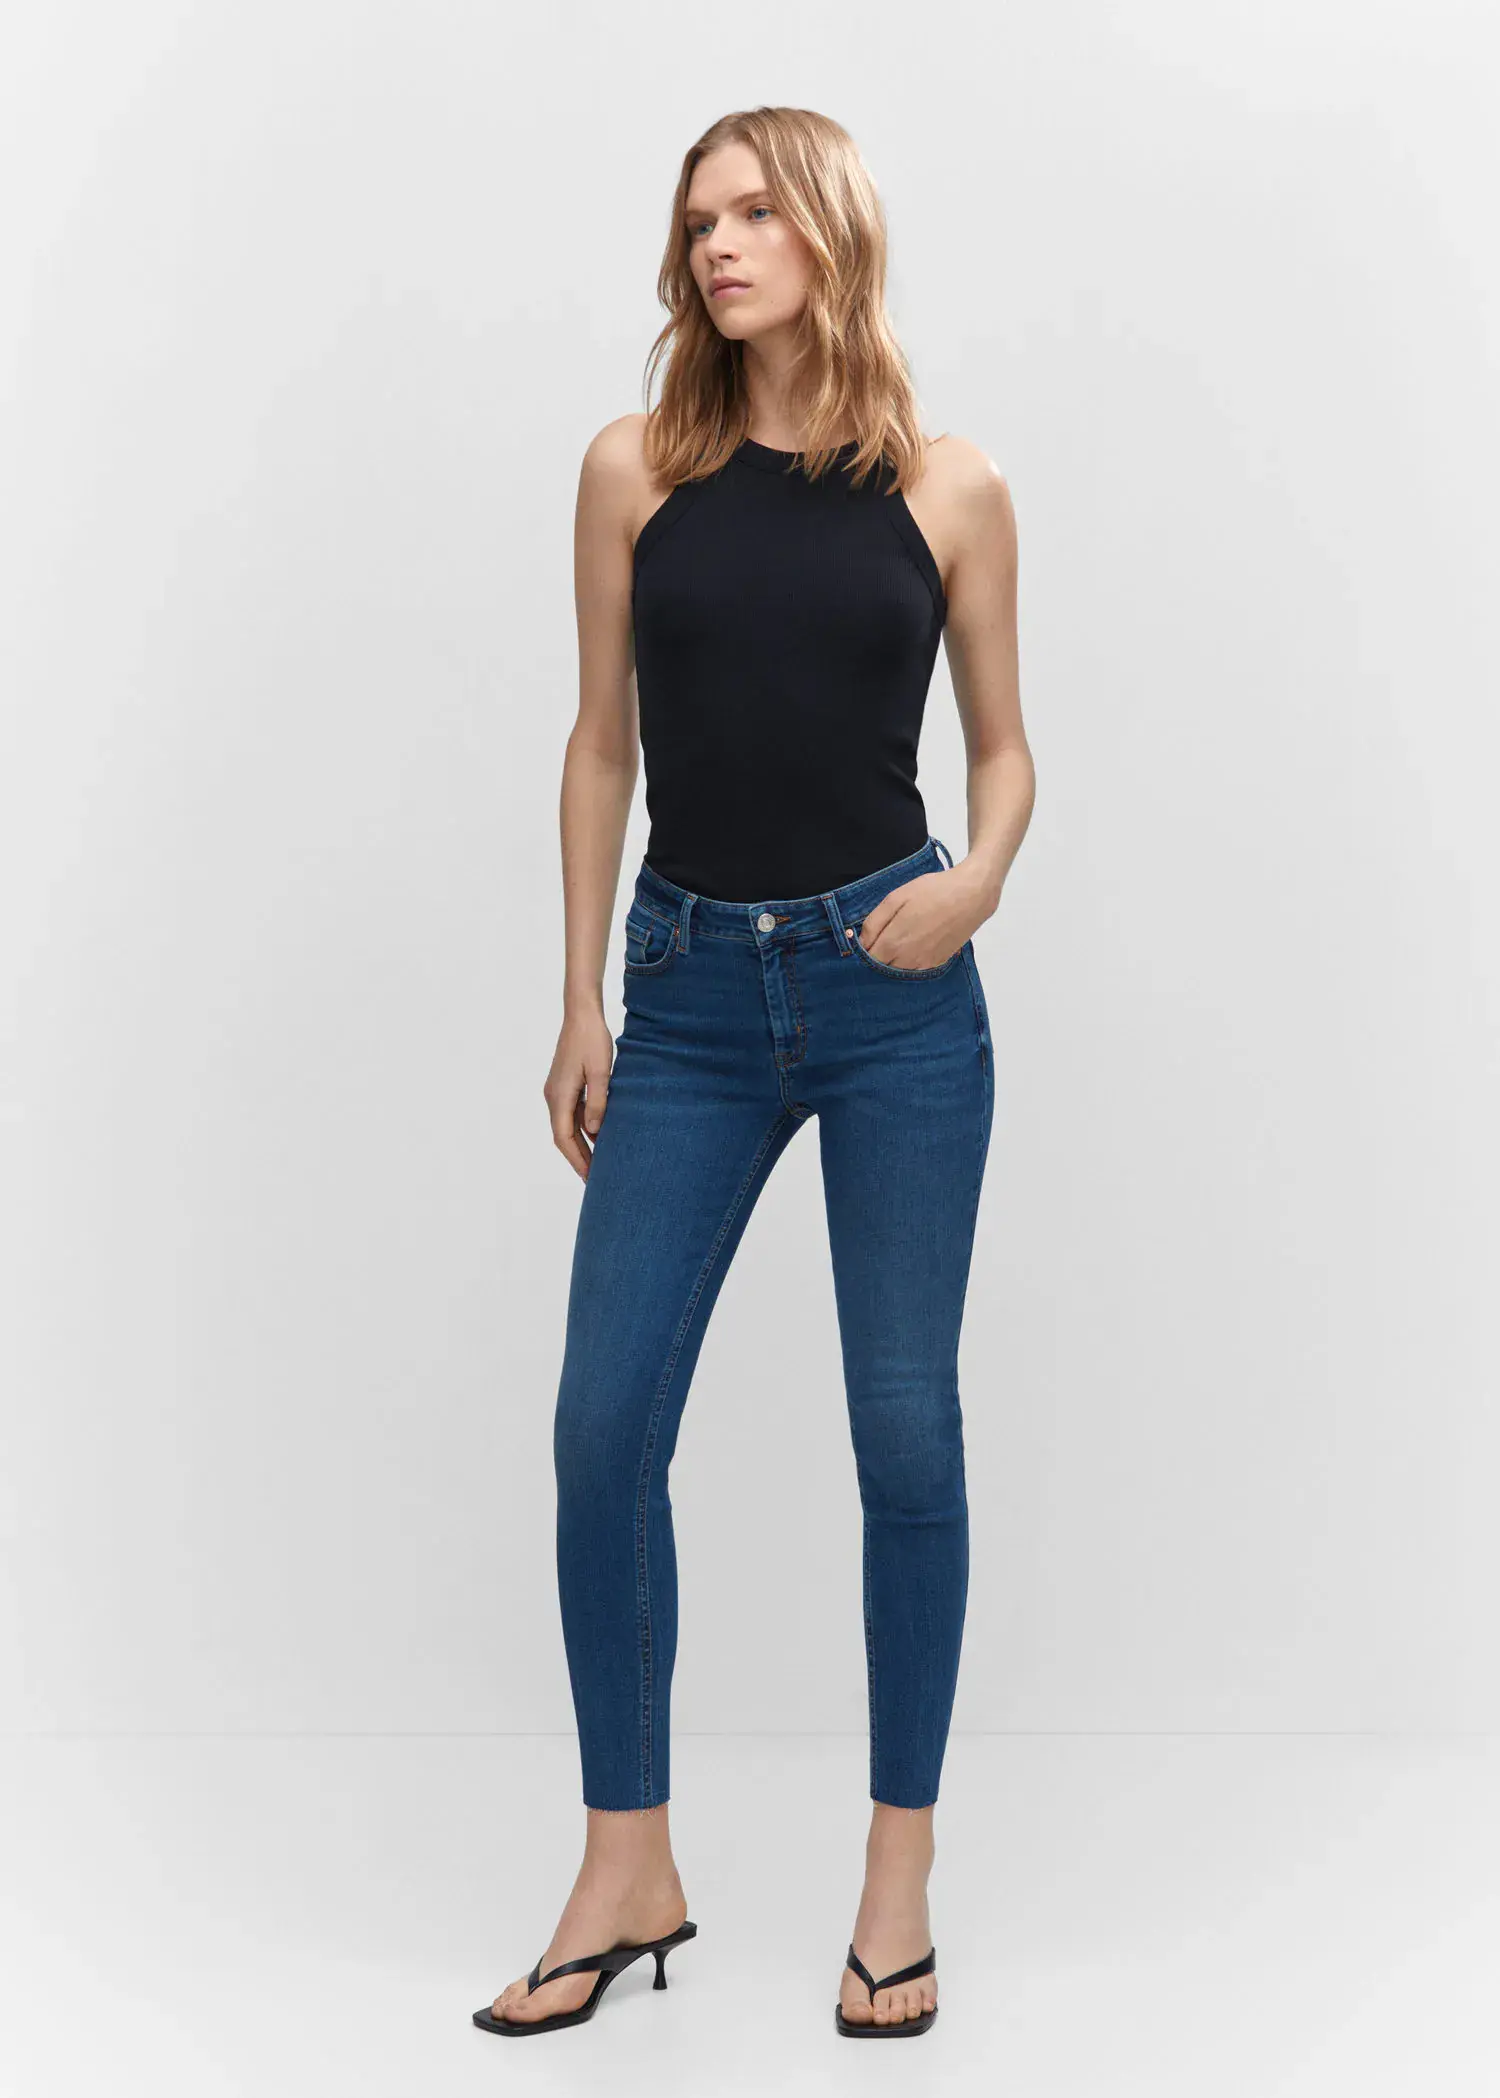 Mango Skinny cropped jeans. a woman wearing a black top and blue jeans. 